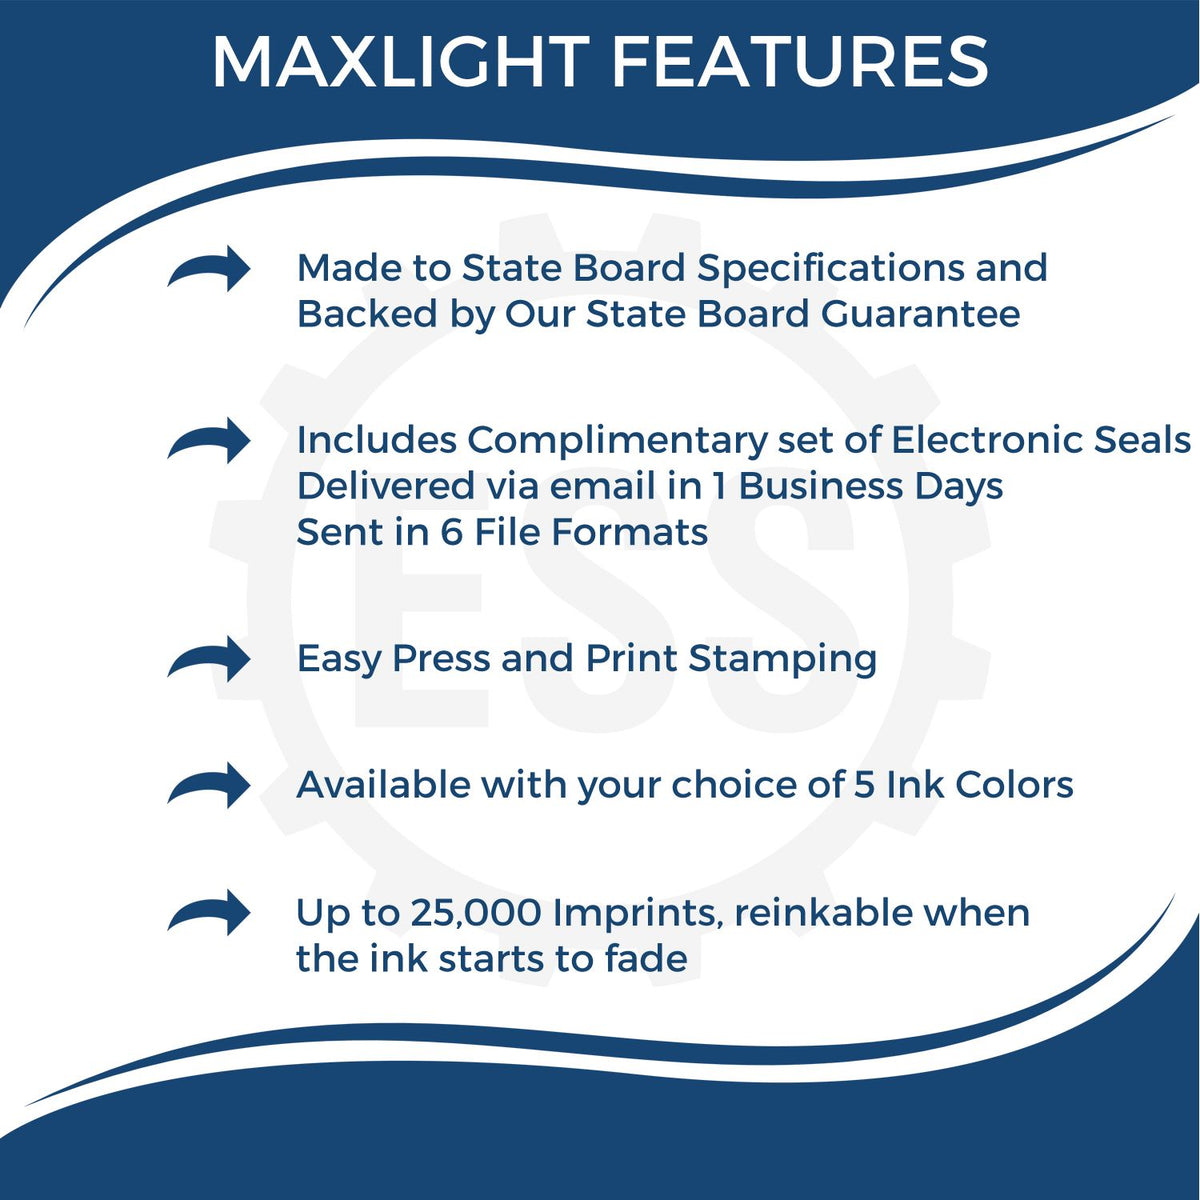 A picture of an infographic highlighting the selling points for the Premium MaxLight Pre-Inked Nebraska Geology Stamp